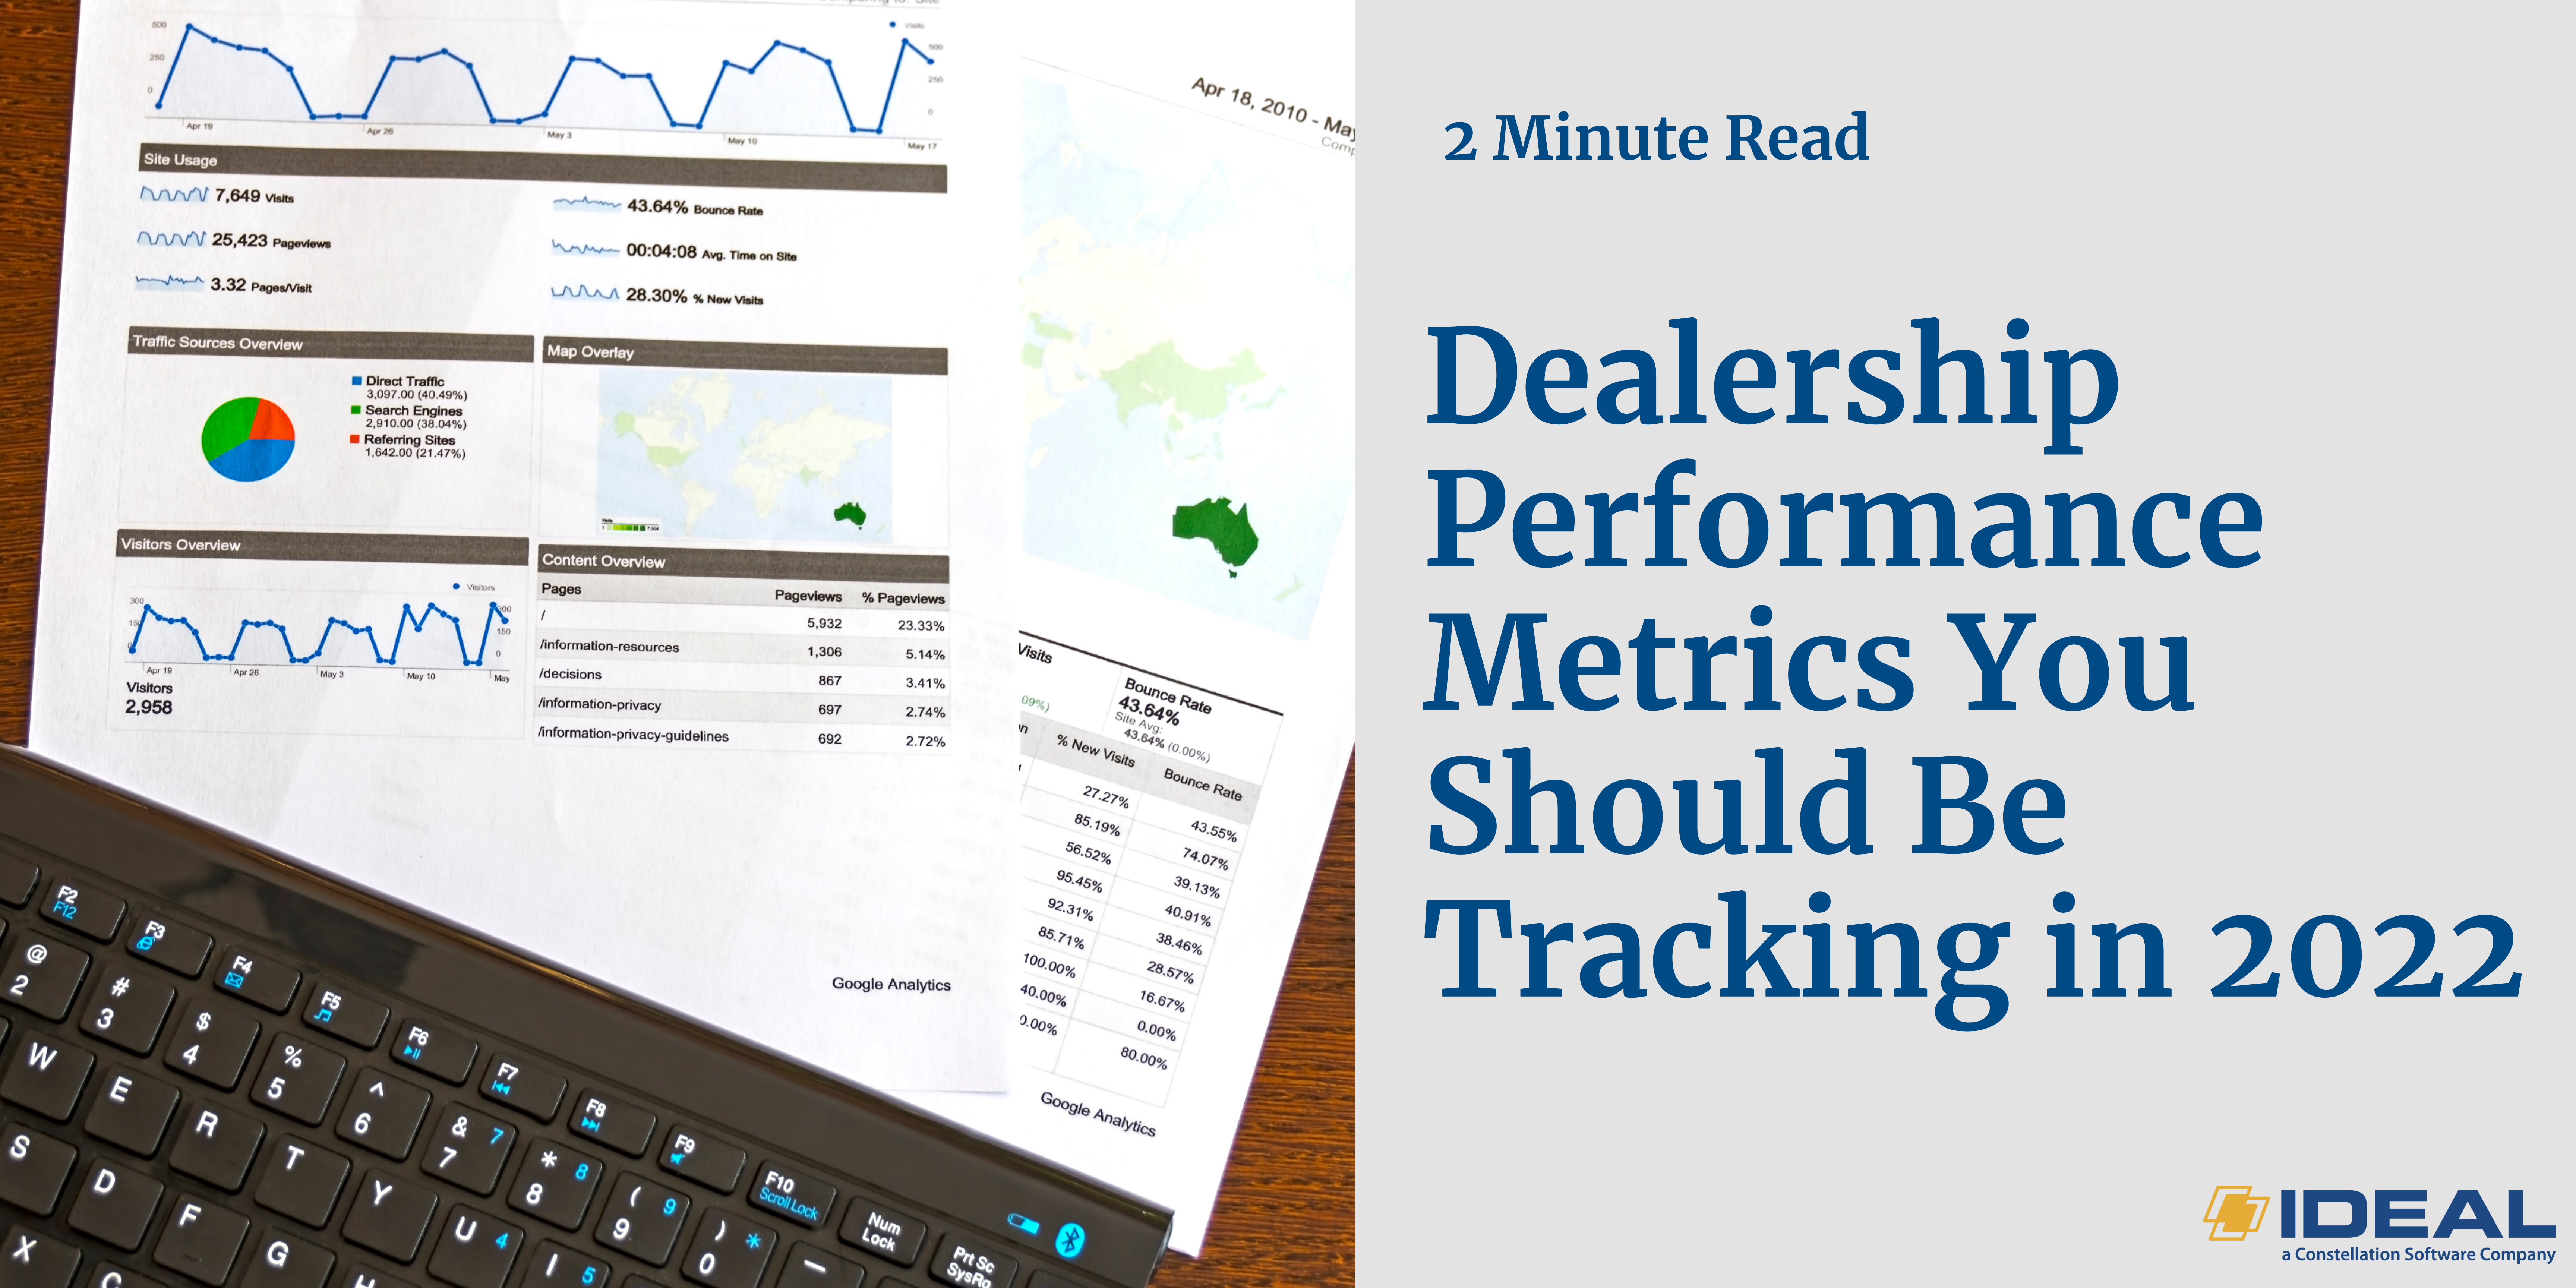 Dealership Performance Metrics You Should Be Tracking in 2022